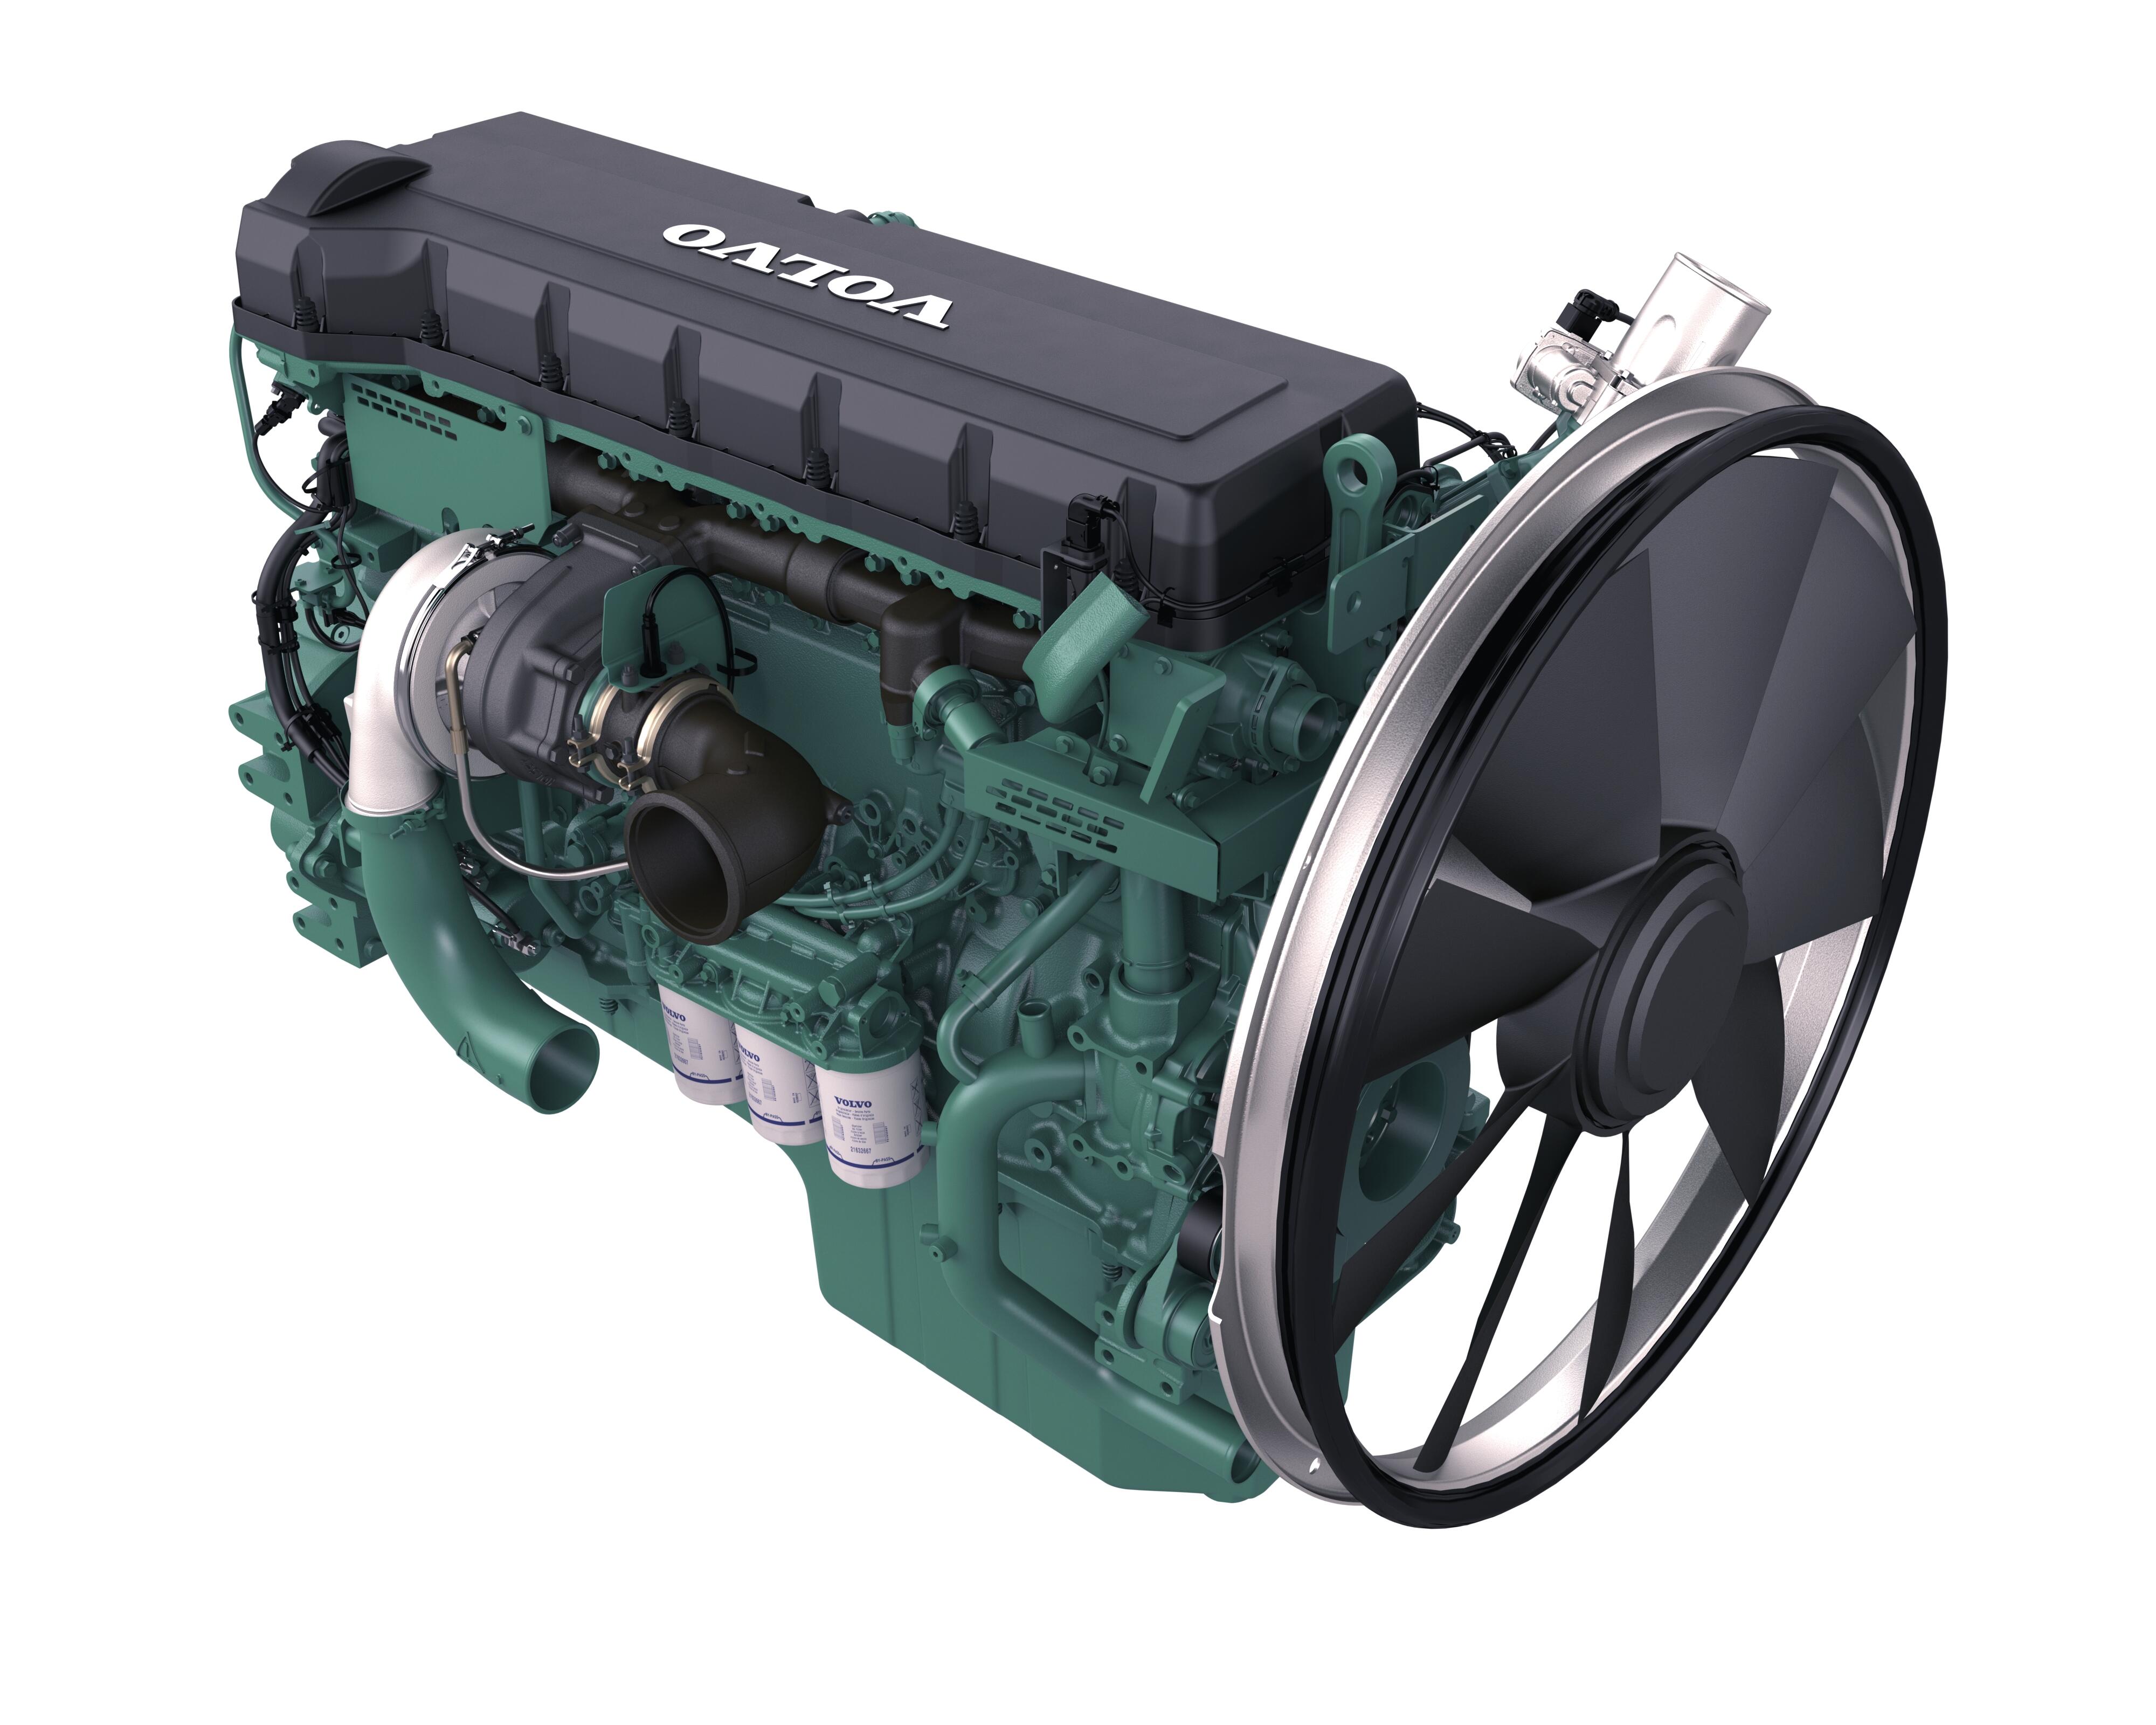 Volvo Penta’s D16 engine for Stage IV within Europe